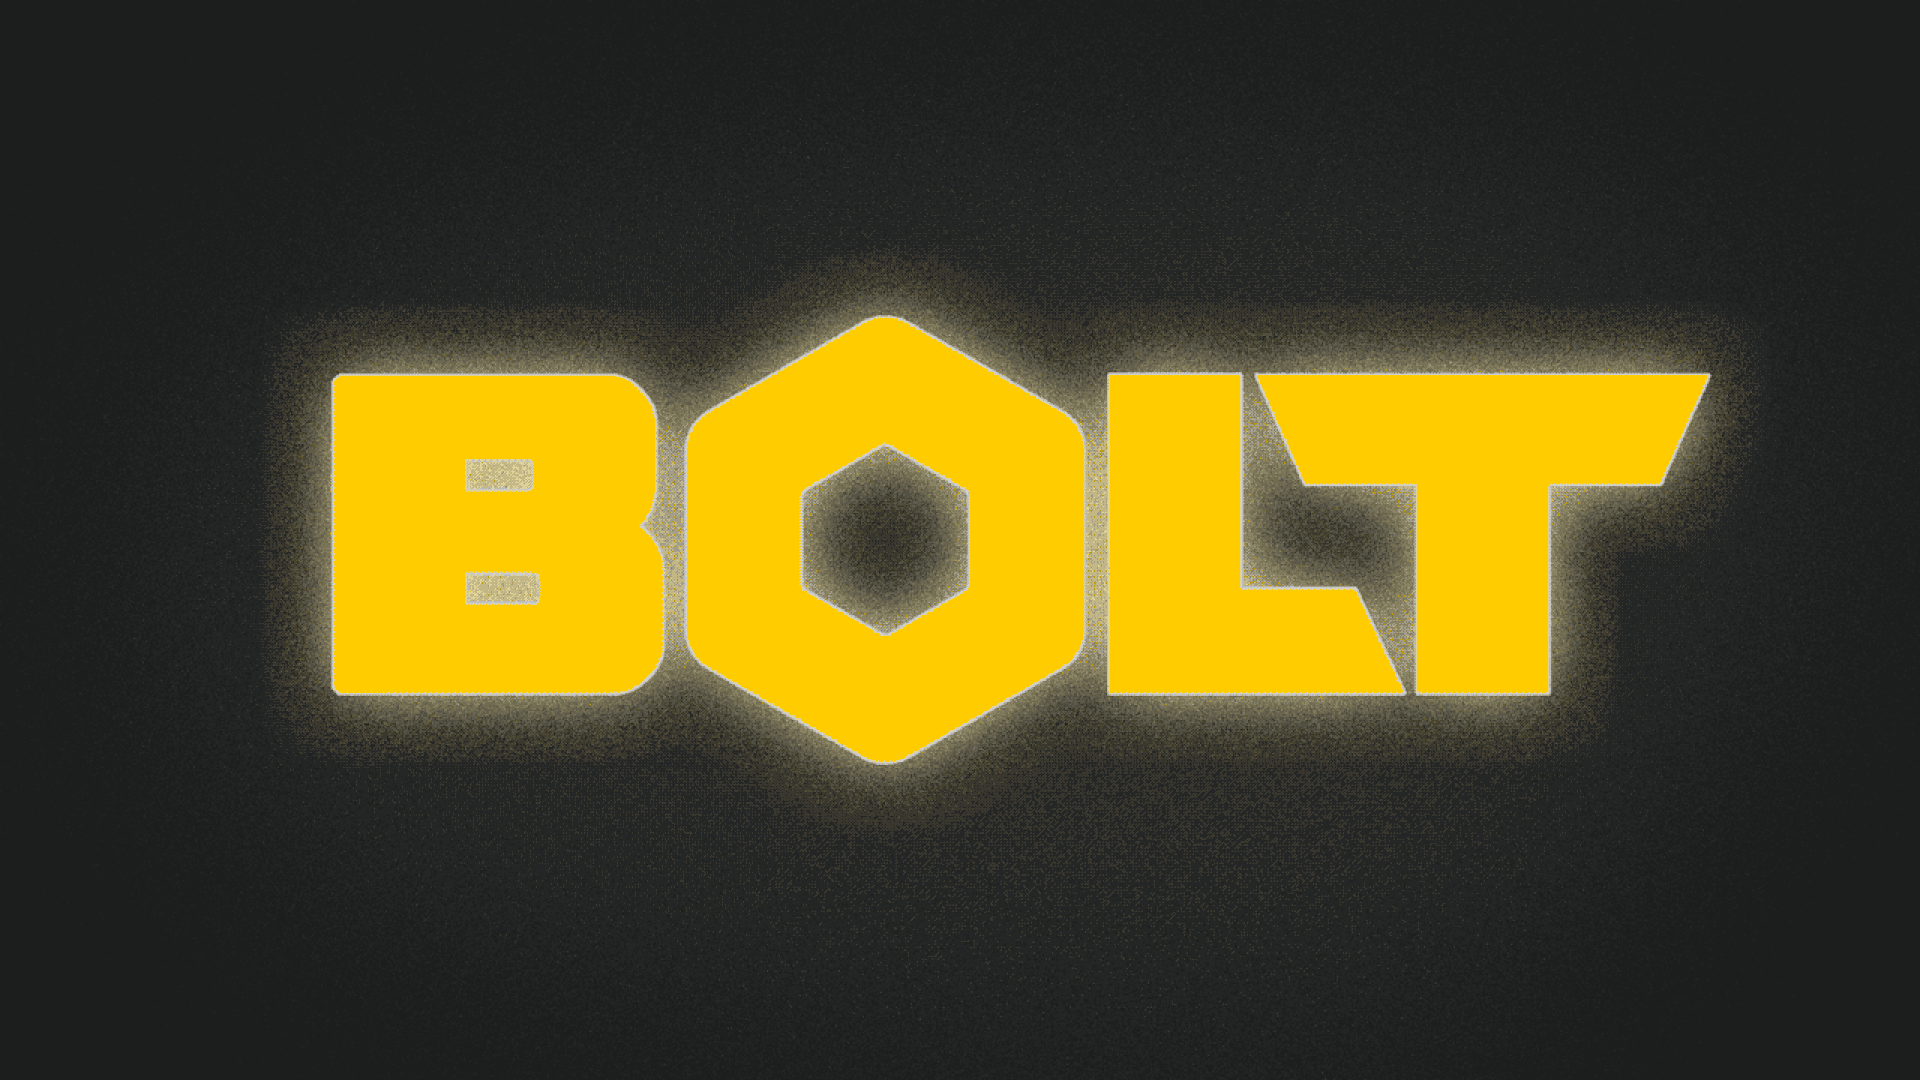 The Bolt logo appears and disappears.